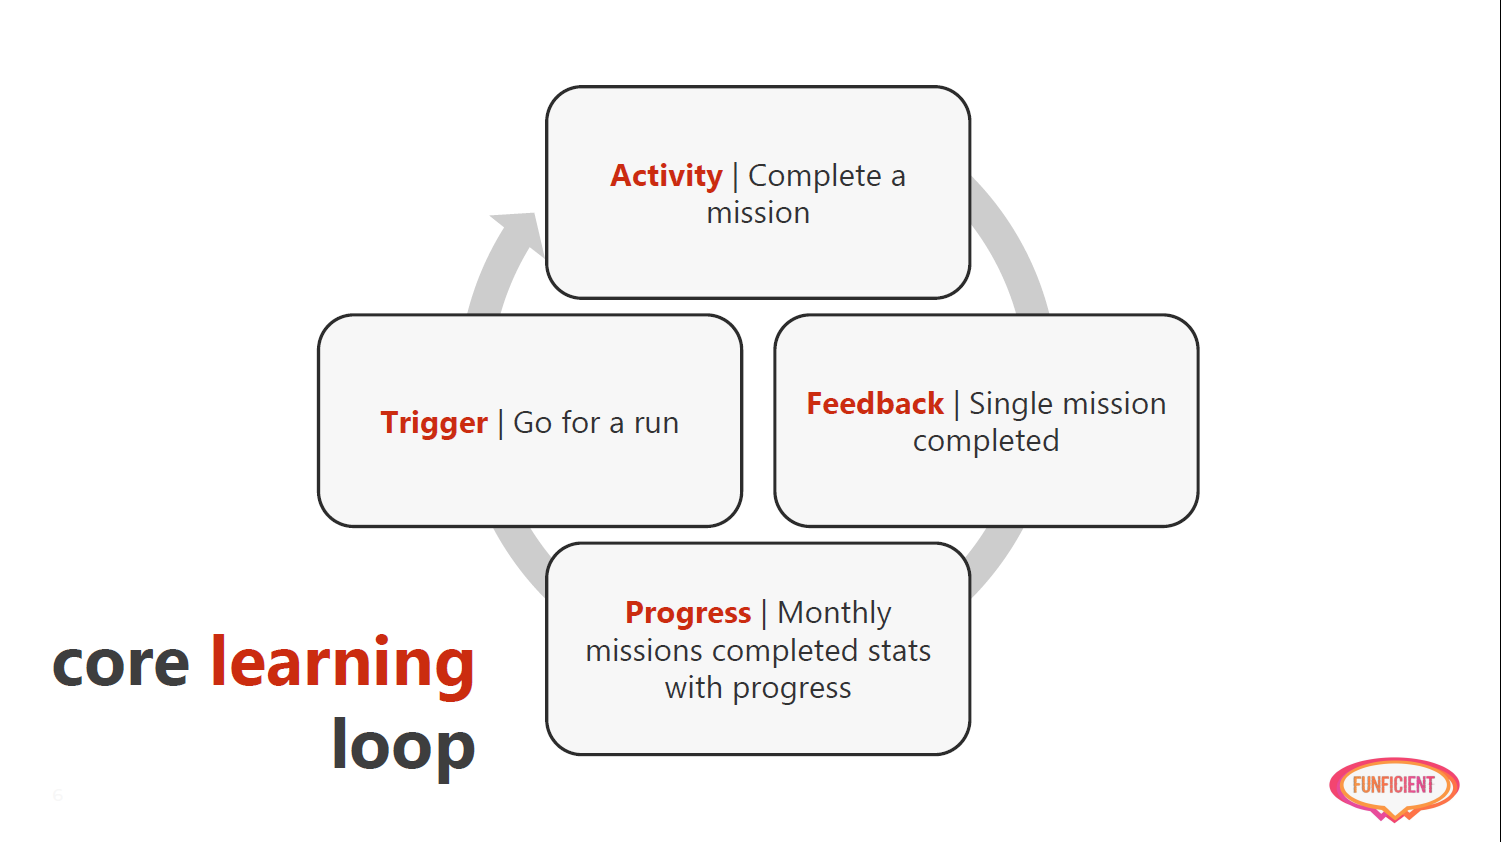 Image of the core learning loop